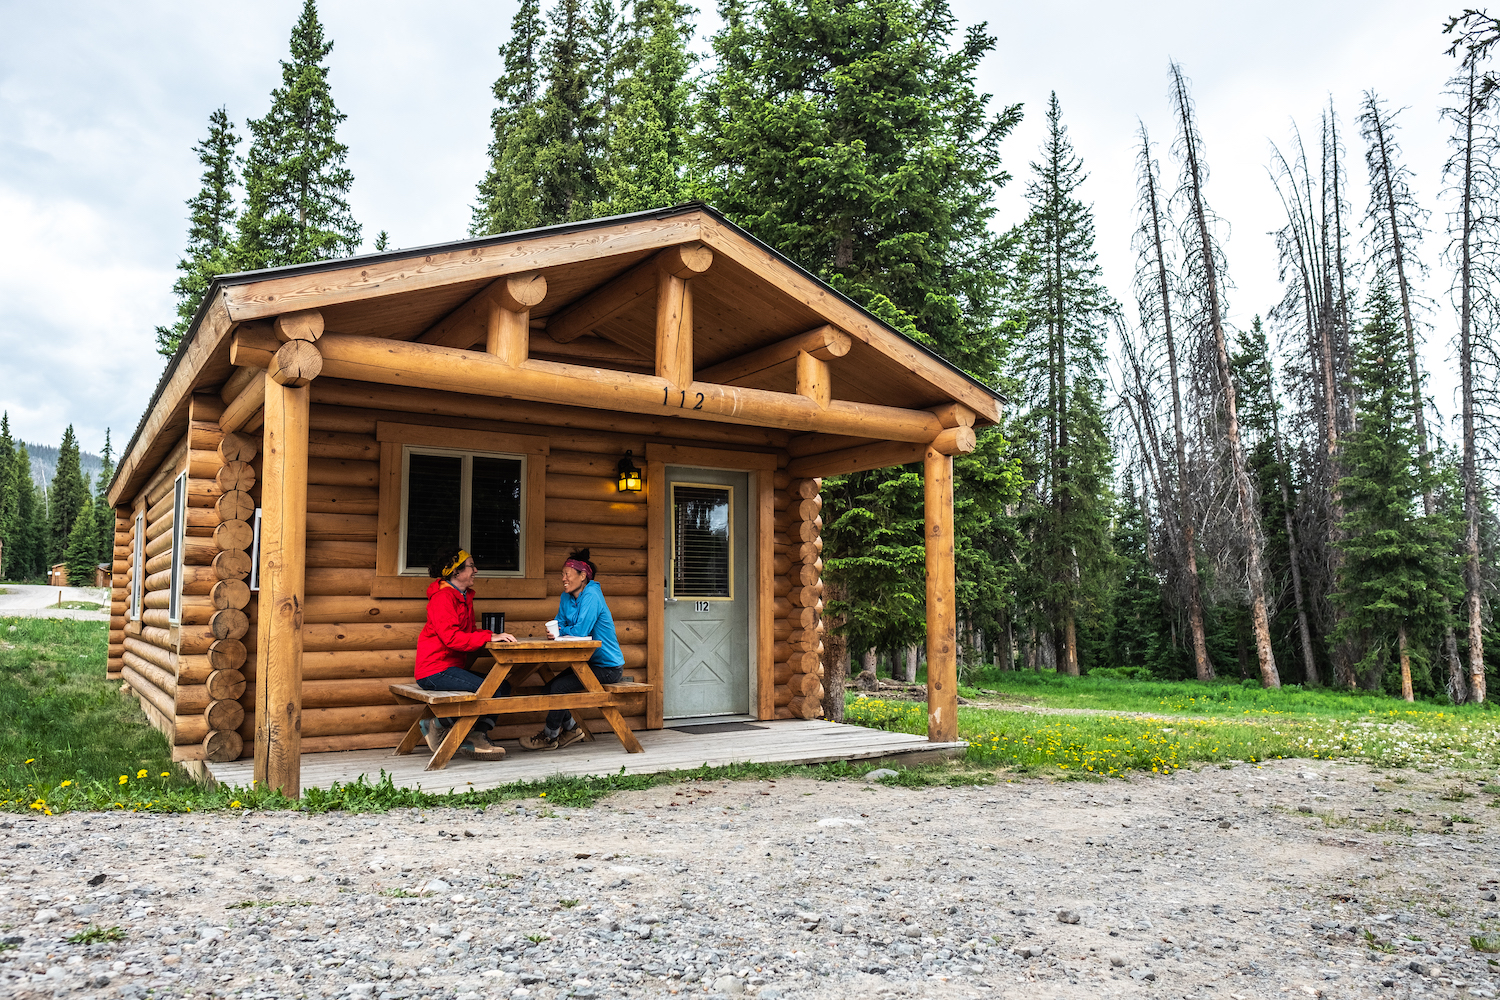 Caroline Whatley and Erin McGrady sit at a picnic table in front of their cabin at Togwotee Mountain Lodge. Caroline is in a red jacket and Erin is in a blue jacket.